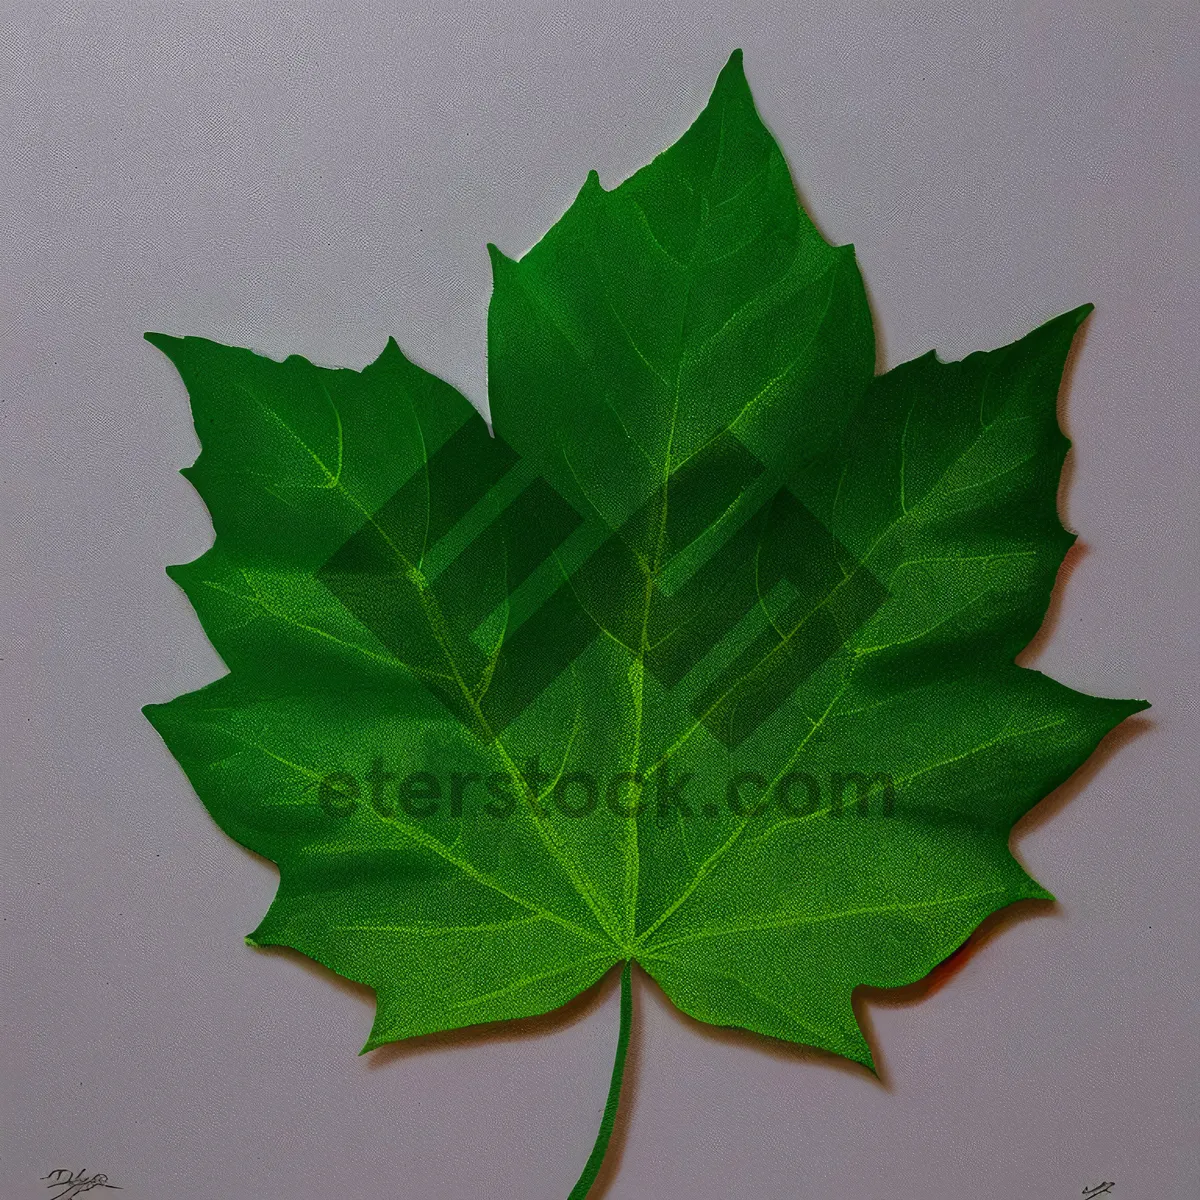 Picture of Vibrant Maple Leaf in Summer Garden